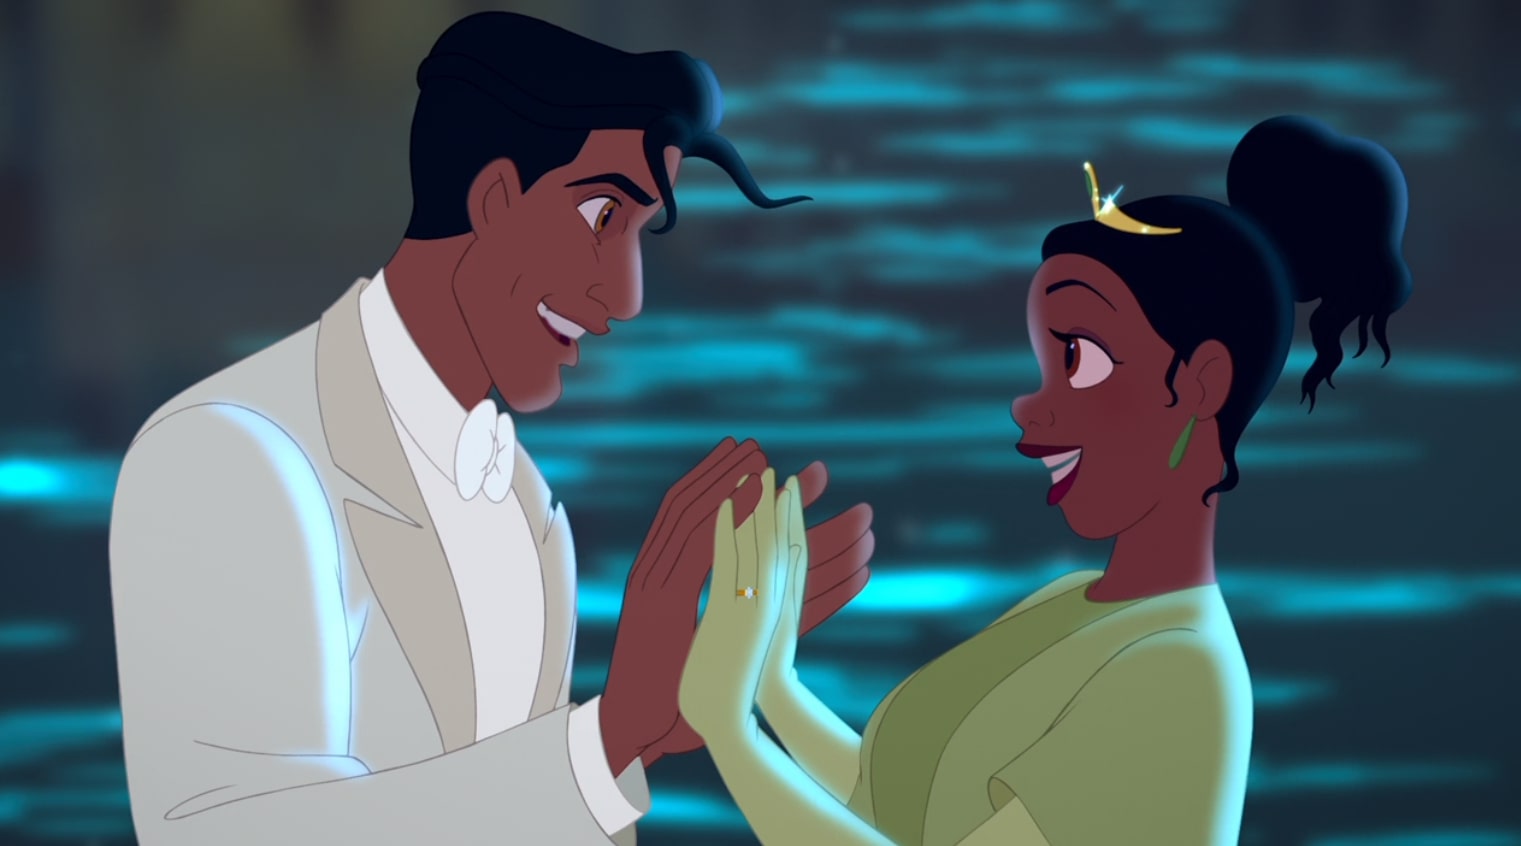 Blue Skies and Sunshine! Five(ish) Fun Facts About Disney’s The Princess and the Frog